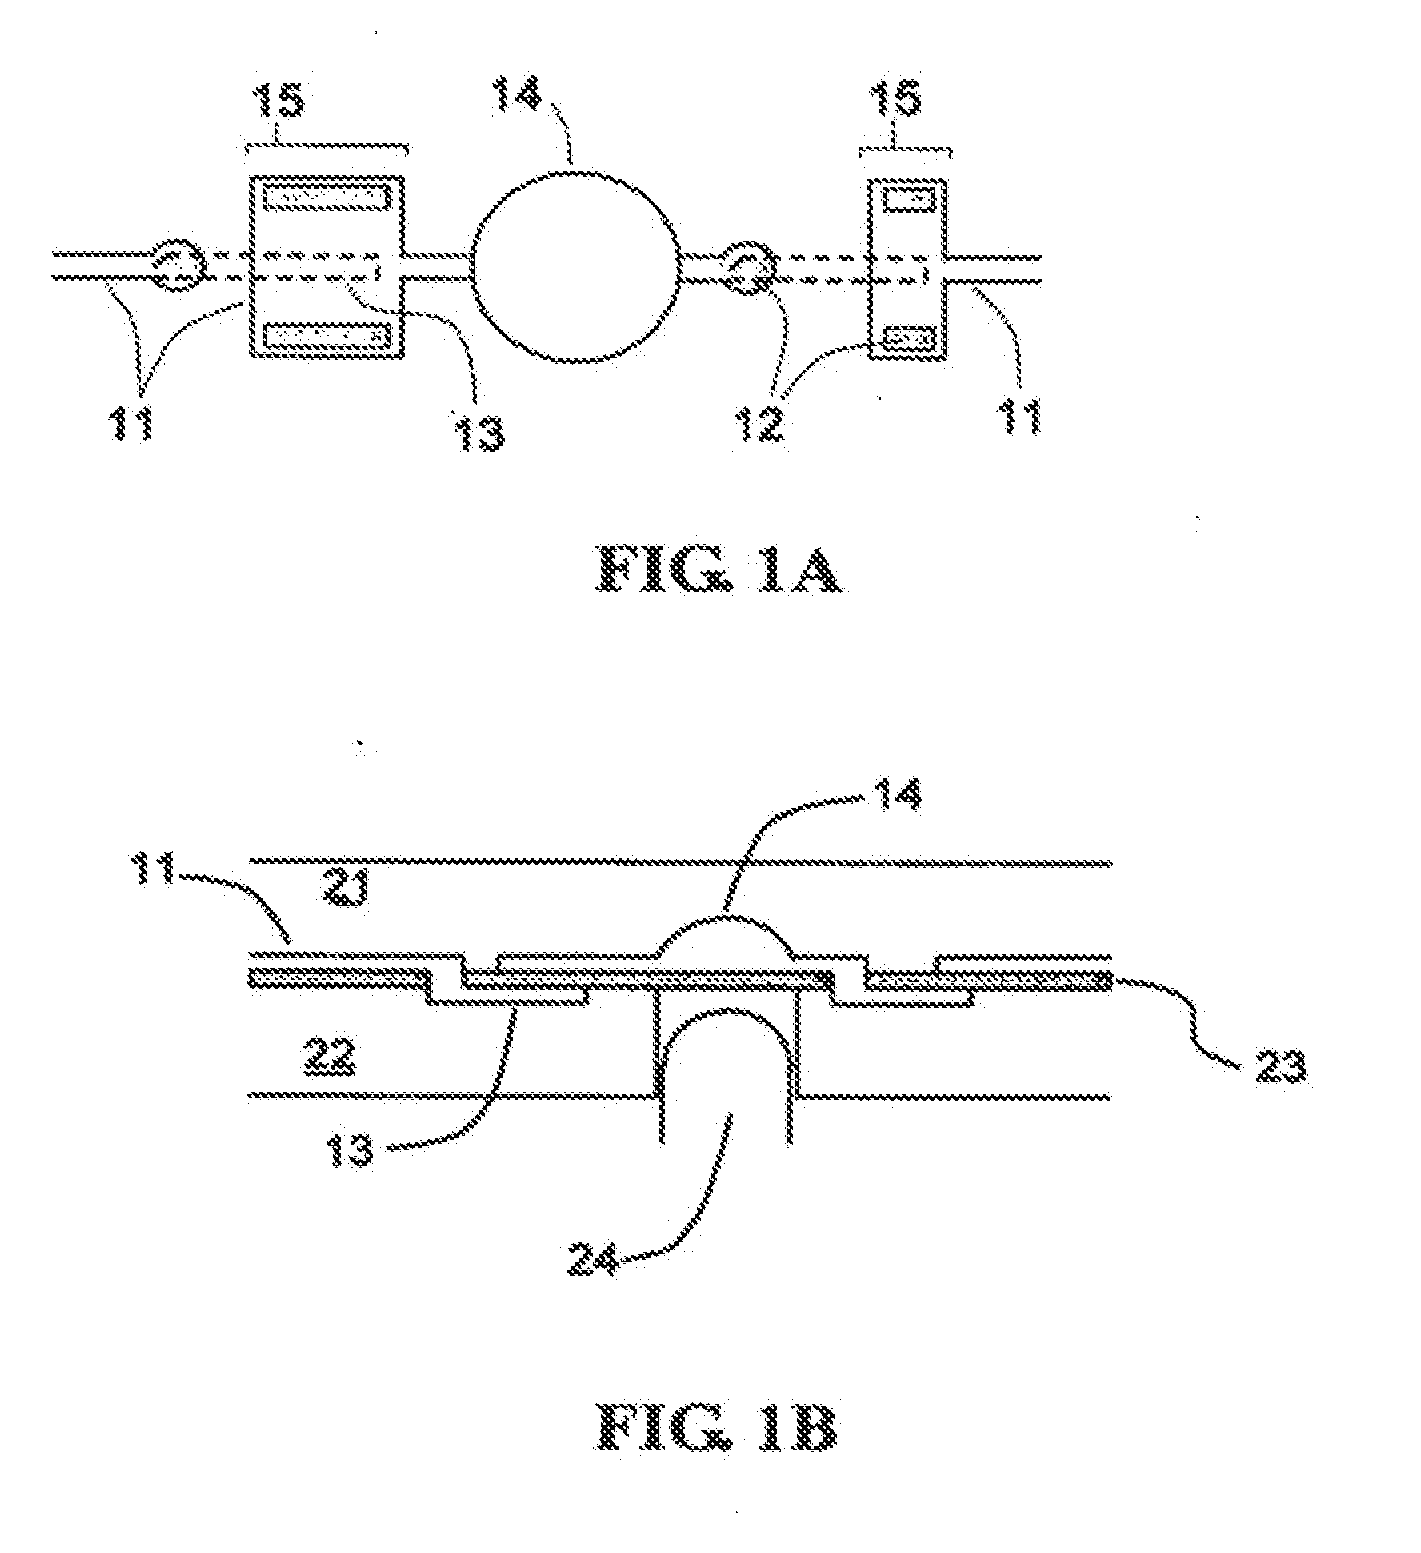 Valve Structure for Consistent Valve Operation of a Miniaturized Fluid Delivery and Analysis System